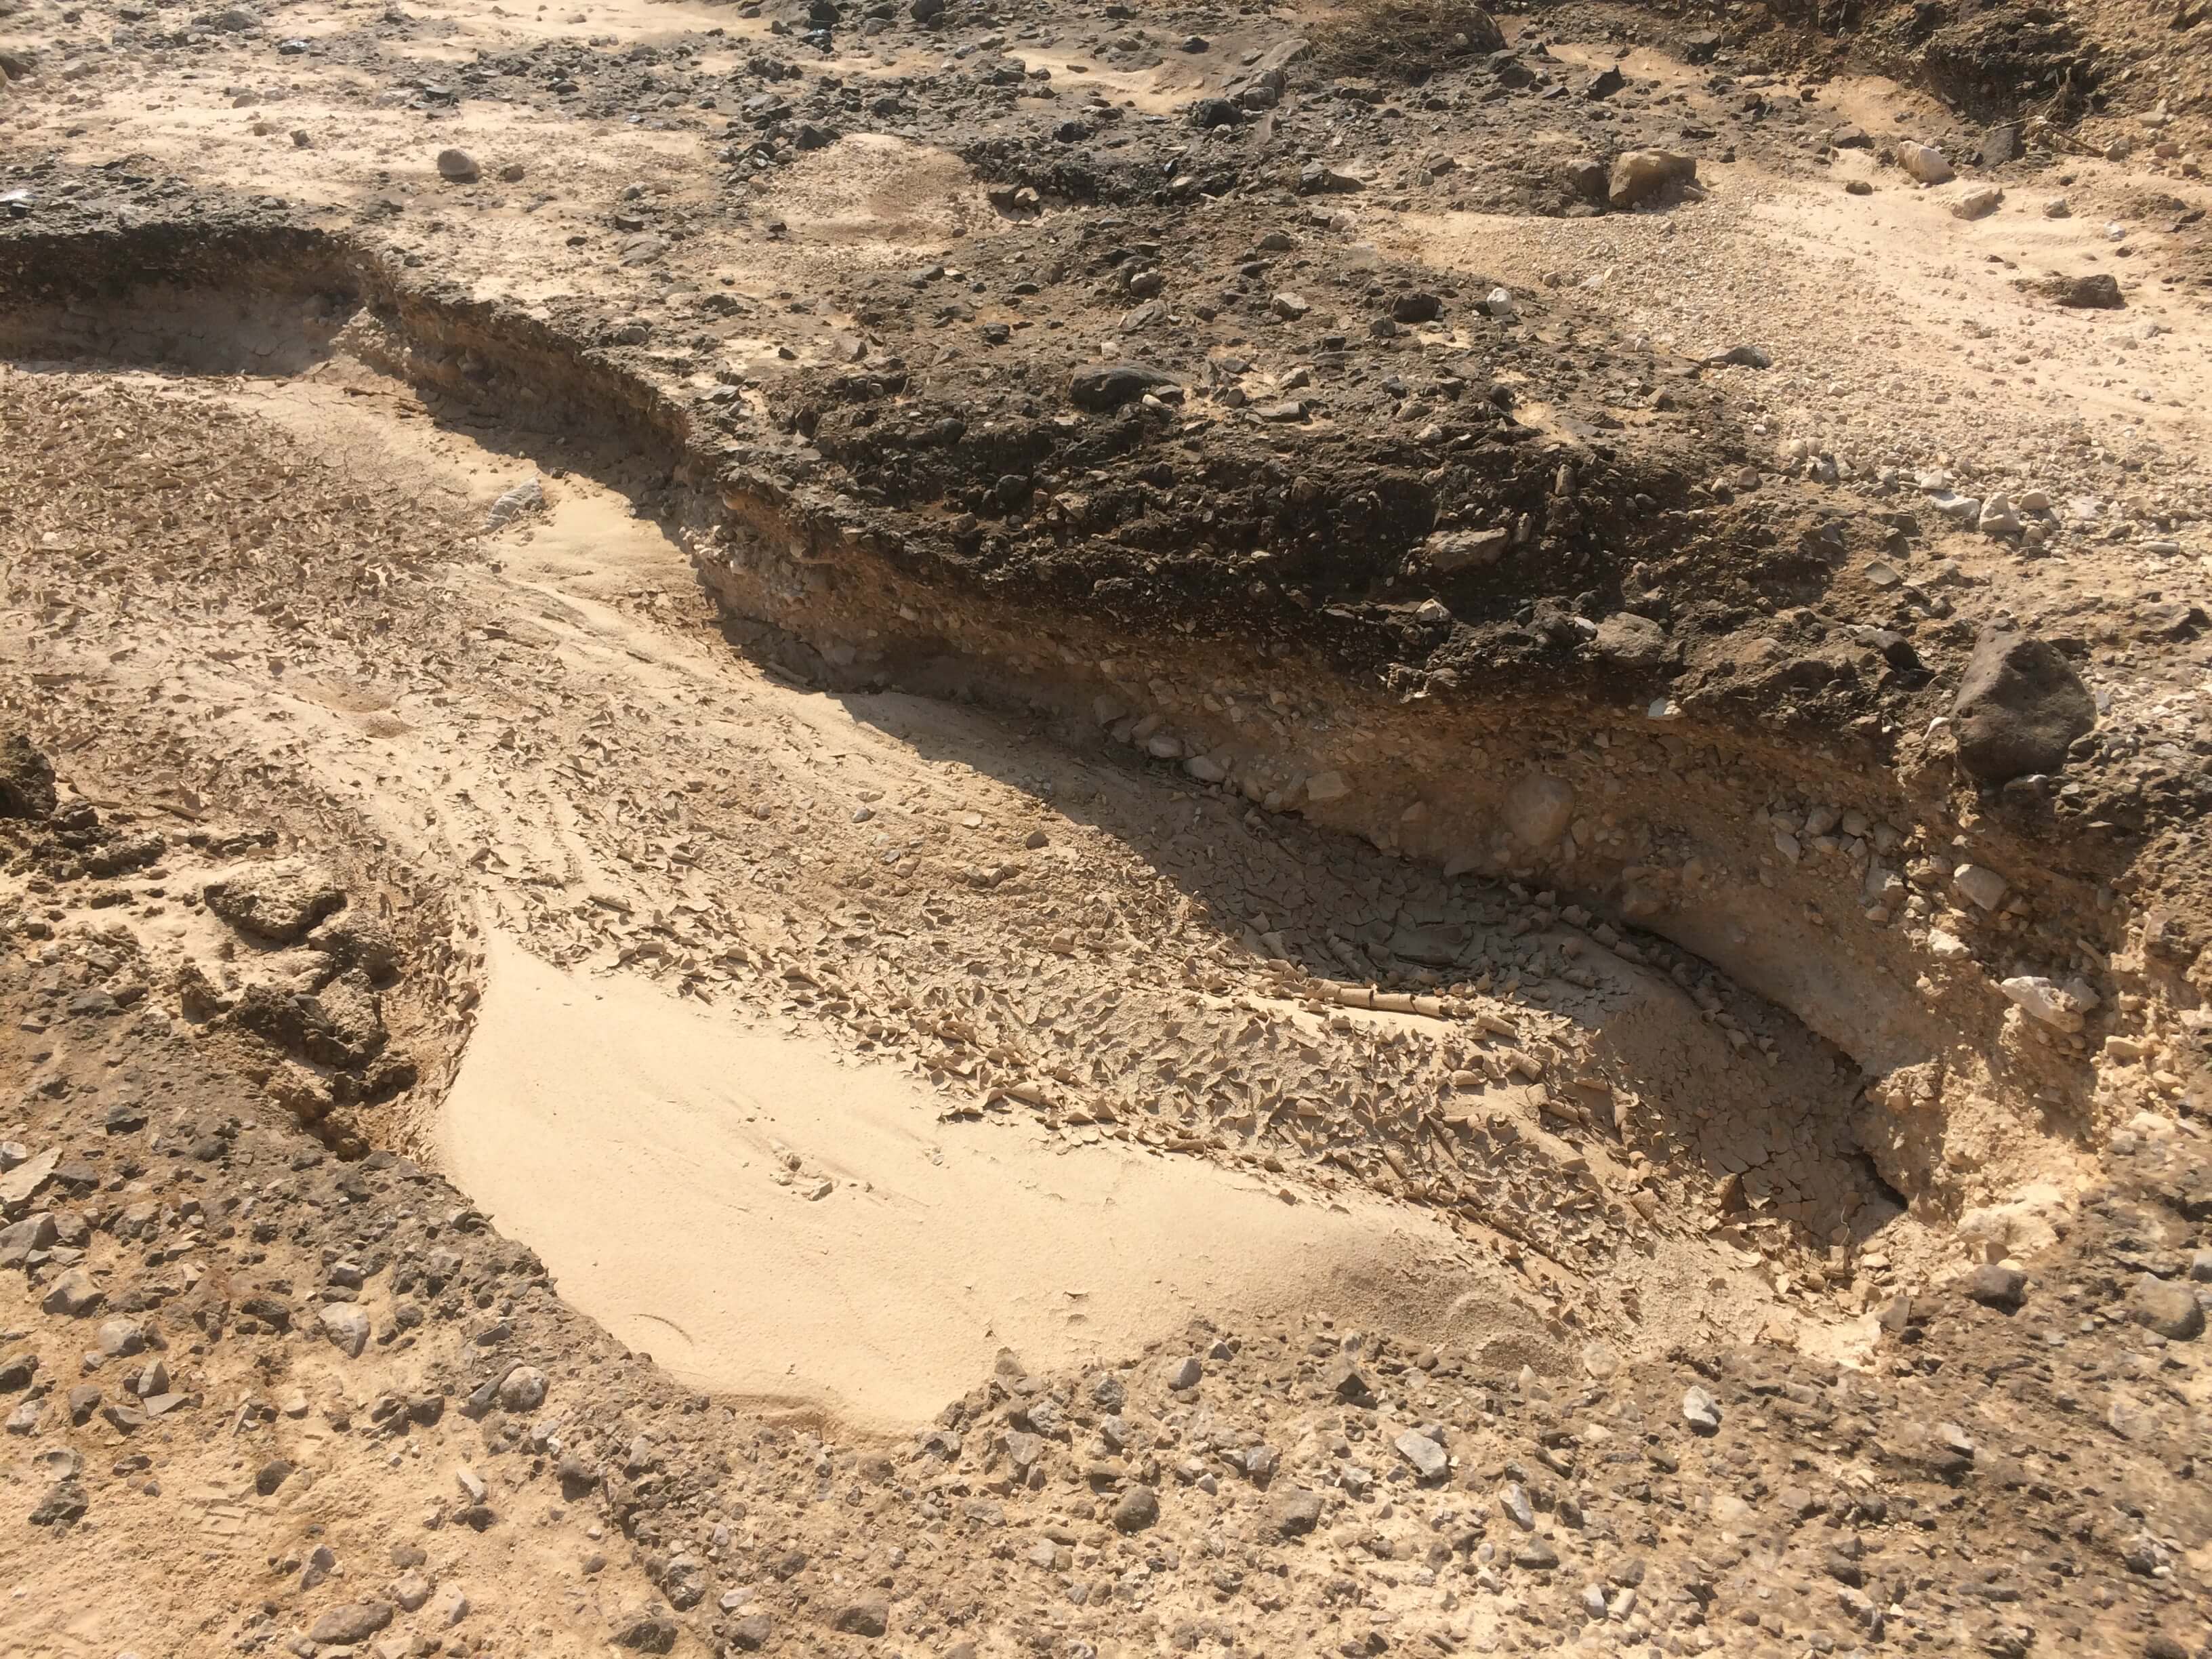 Evrona Reserve a year after the leak. Photo: Oded Netzer, Ministry of Environmental Protection.